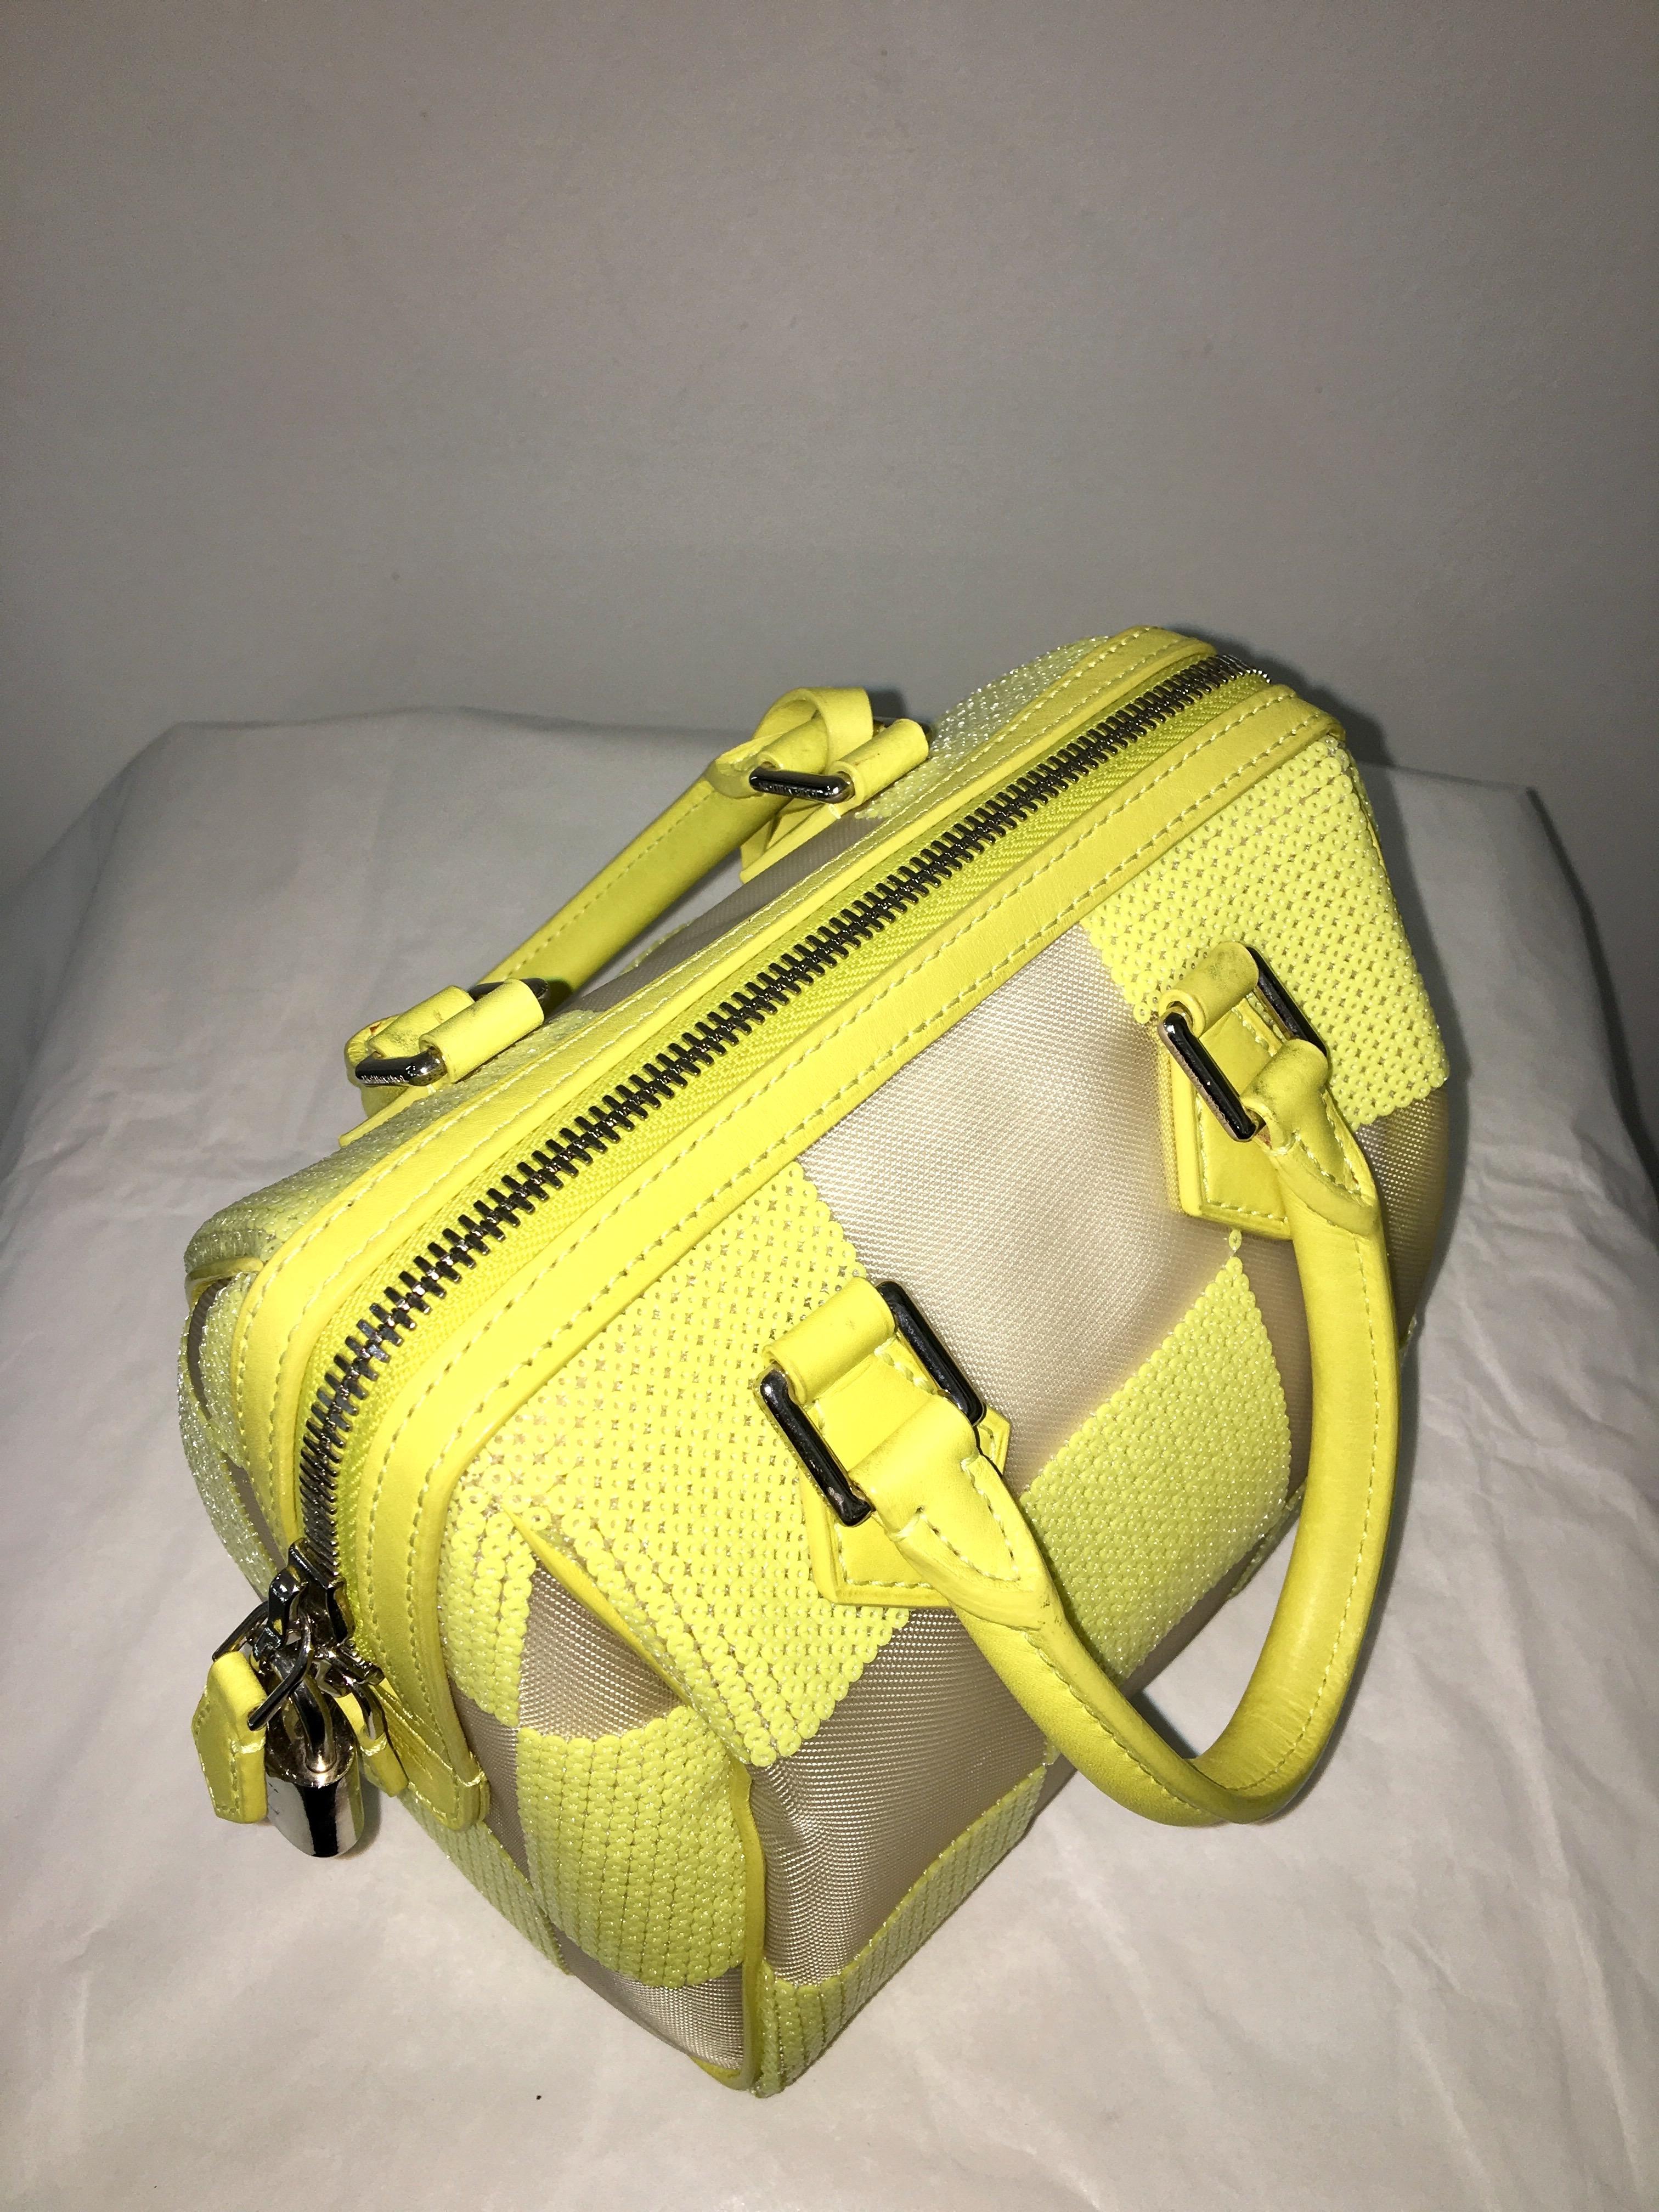 Speedy Louis Vuitton in Limited Edition. fashion show collection, very rare. 
Limited edition reminiscent of the iconic damier motif. Designed by Marc Jacobs, spring-summer 2013 fashion show collection with a hymn to the DAMIER motif.
Yellow checks